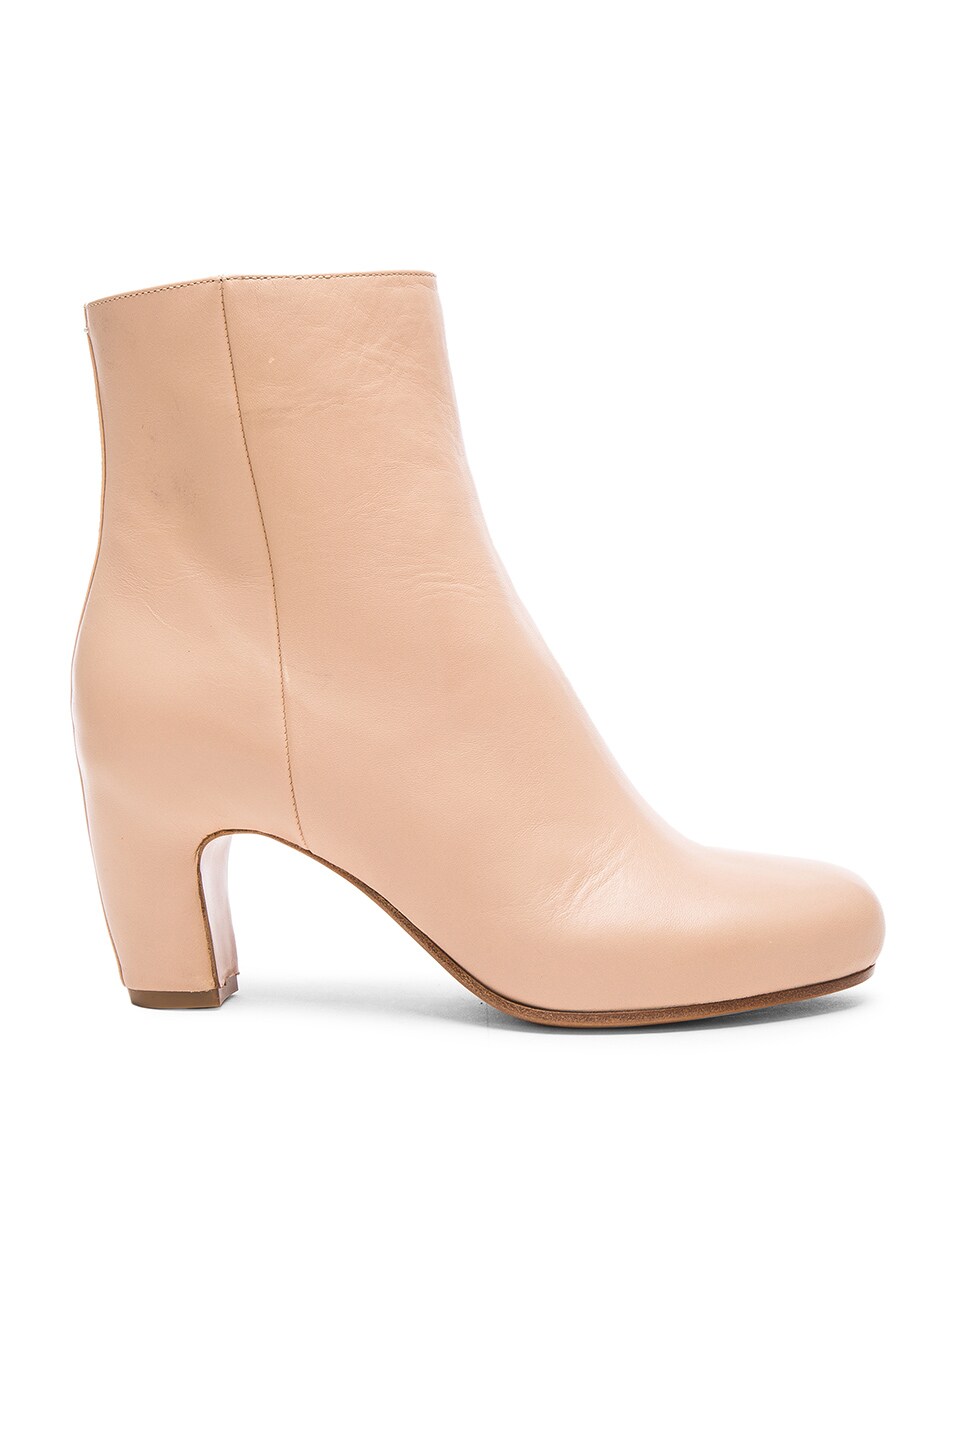 Image 1 of Maison Margiela Leather Booties in Beige